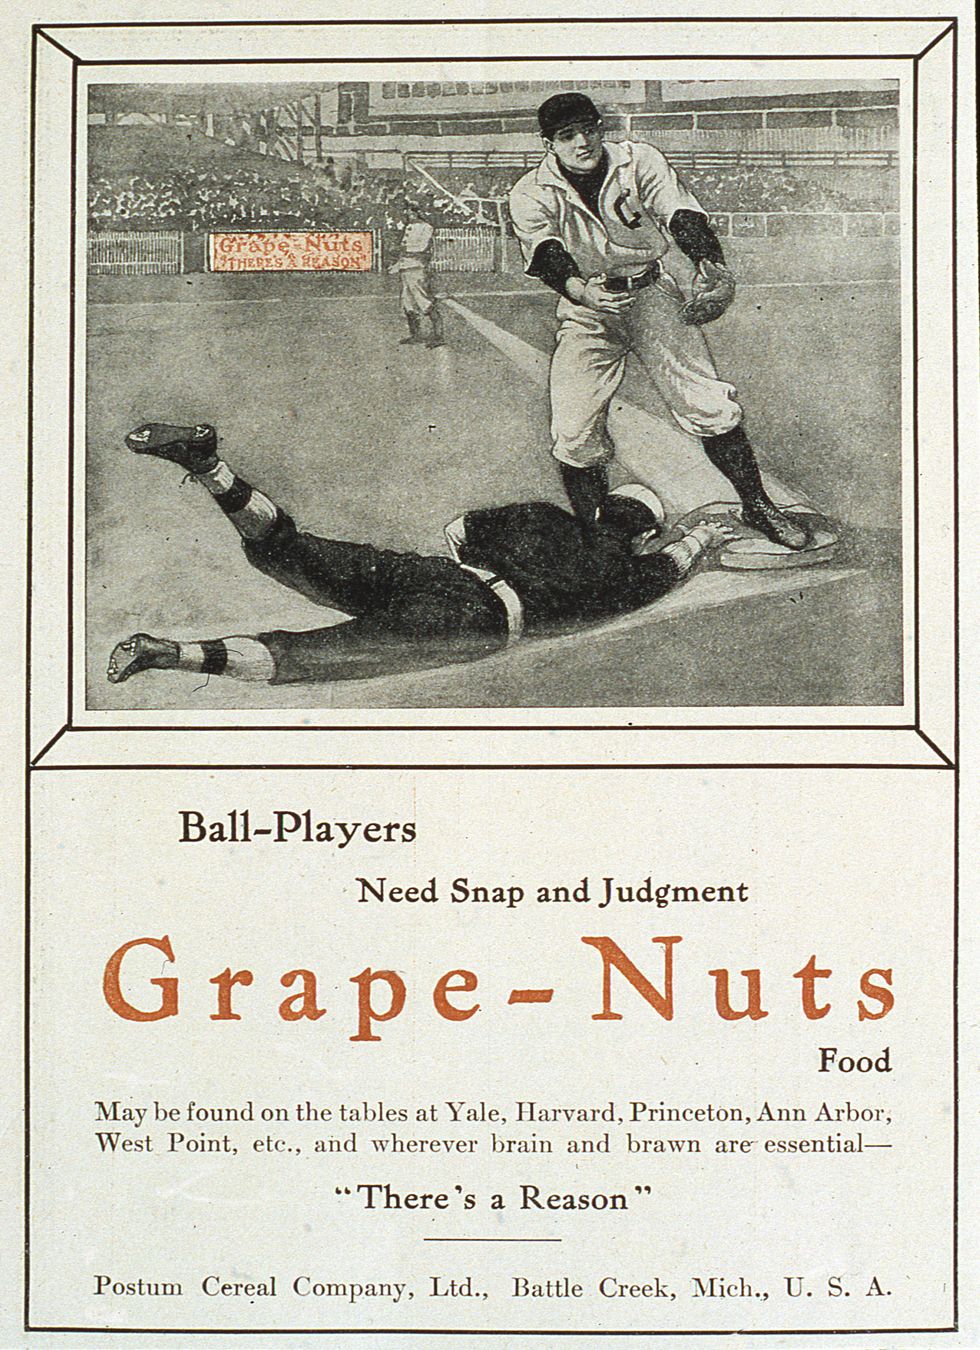 advertisement for grape nuts cereal features an illustration of on field baseball action, circa 1915 photo by transcendental graphicsgetty images